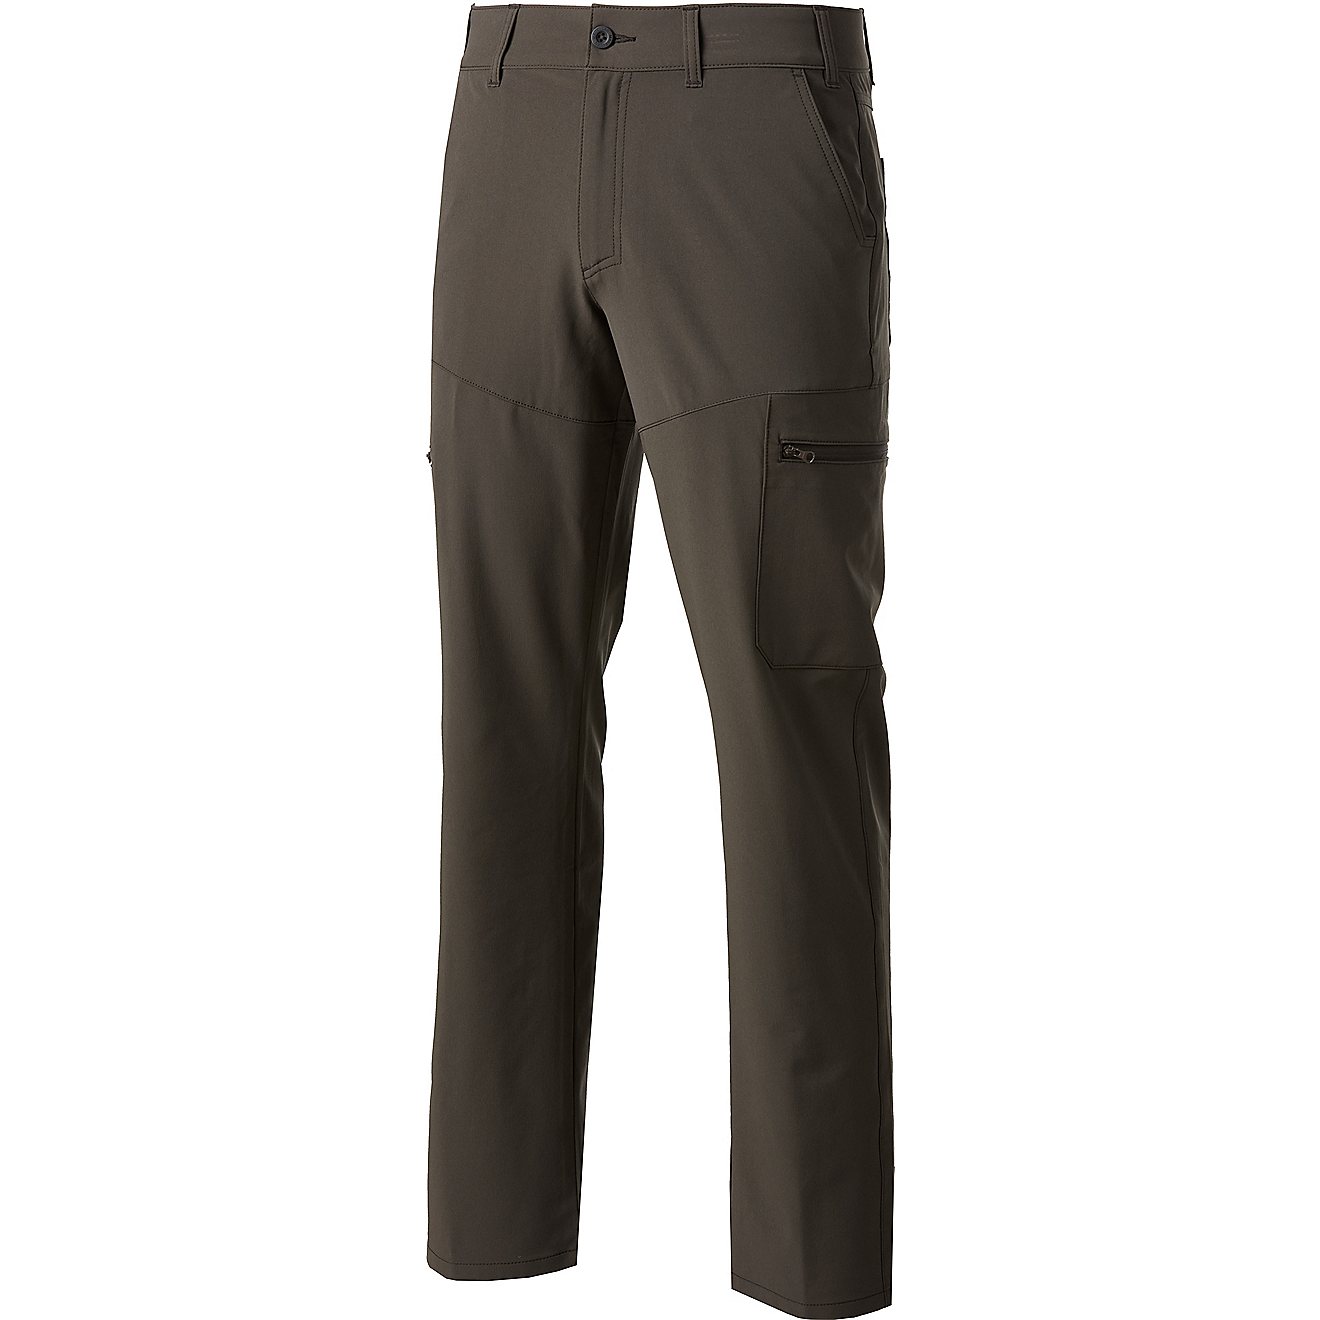 Magellan Outdoors Men's Hickory Canyon Stretch Woven Cargo Pants                                                                 - view number 6